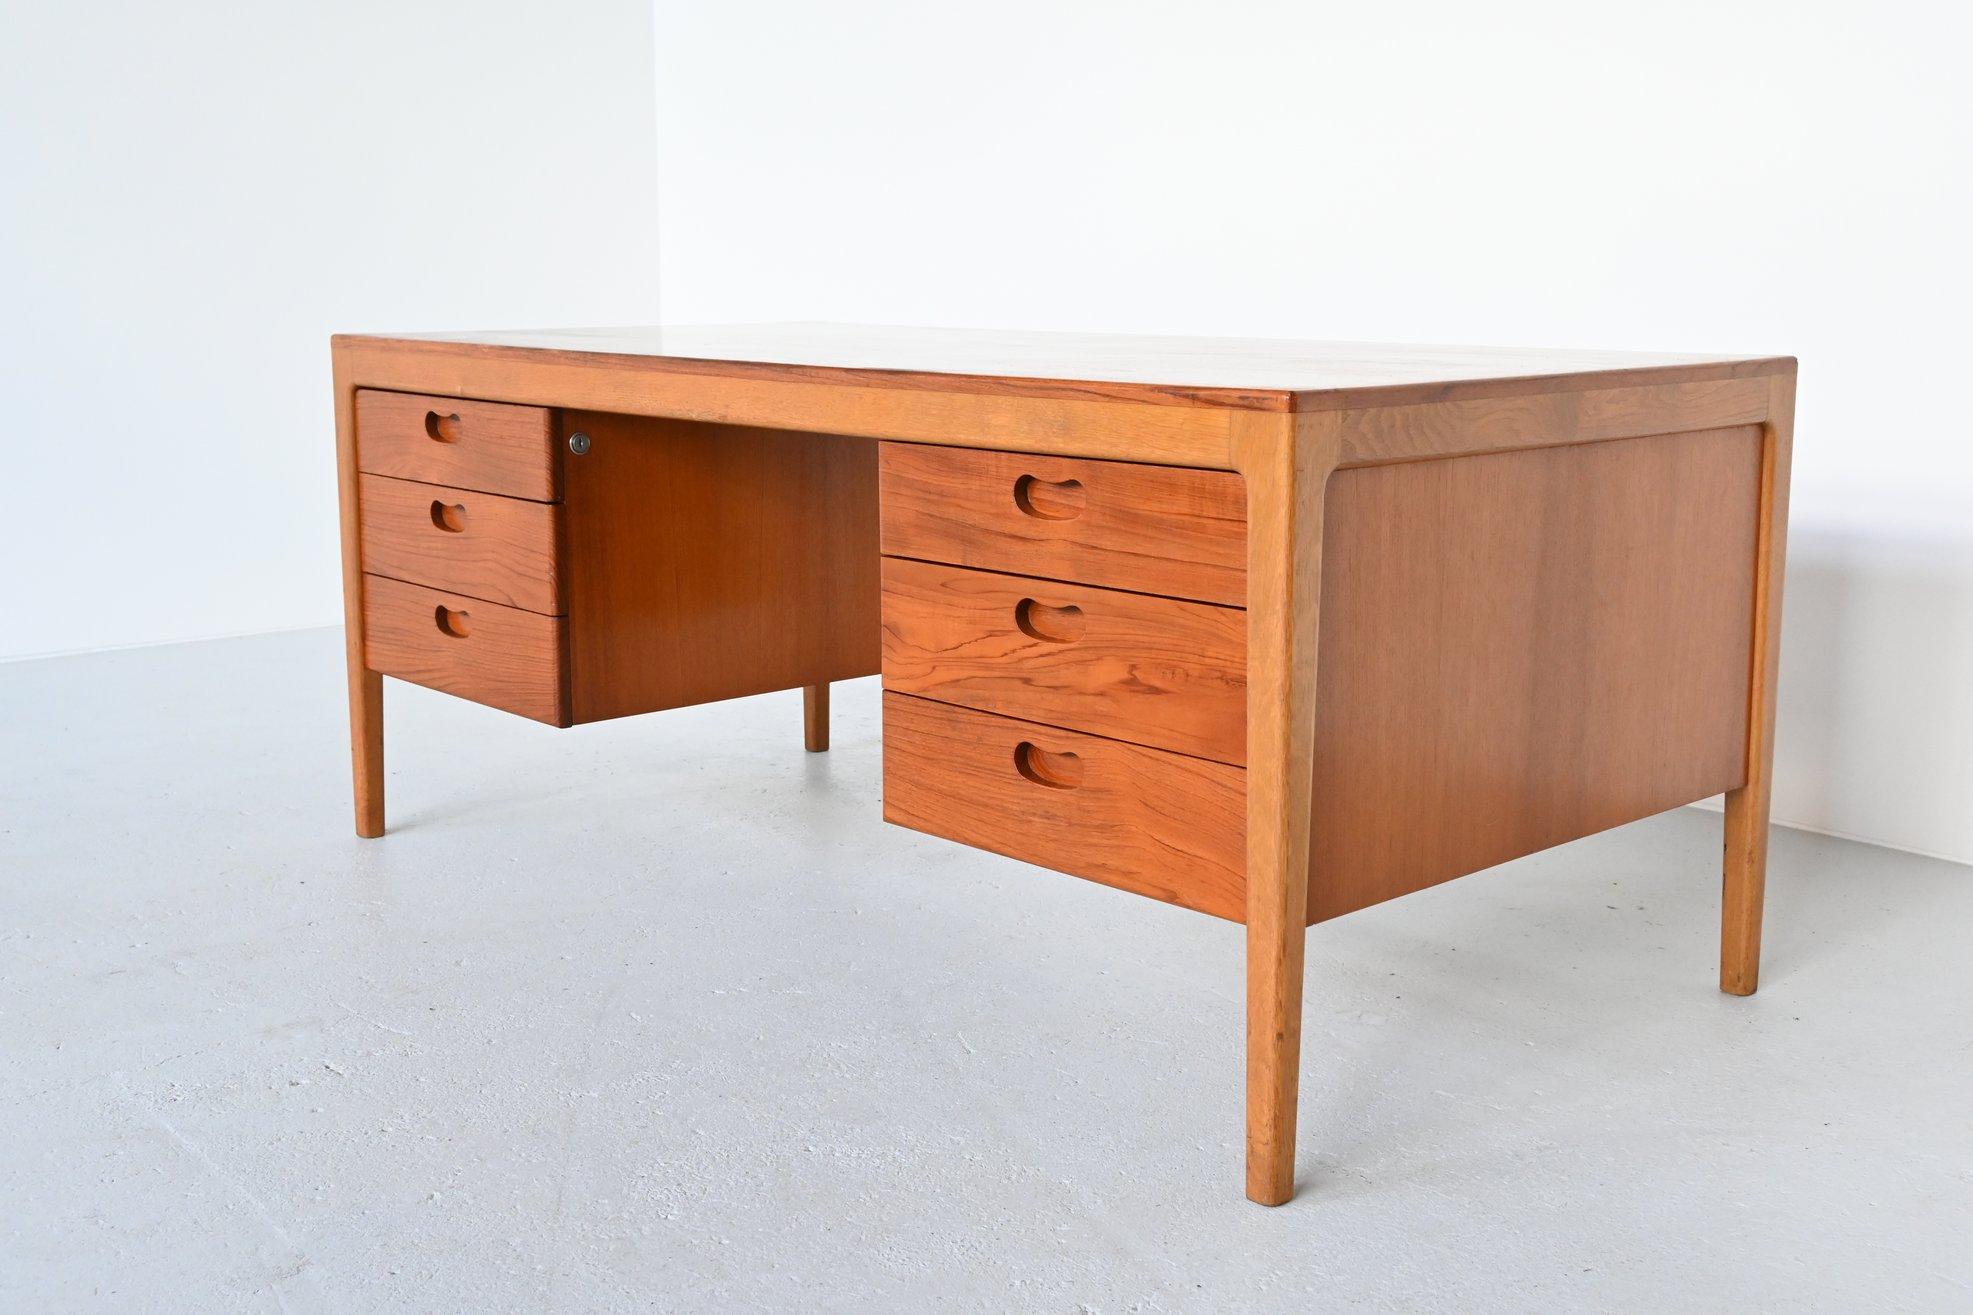 Stunning large and sturdy desk designed by Hartmut Lohmeyer and manufactured by Wilkhahn, Germany, 1959. This desk is made of oak and teak wood which creates a very nice and playful contrast. It has 6 large drawers that provide plenty of storage